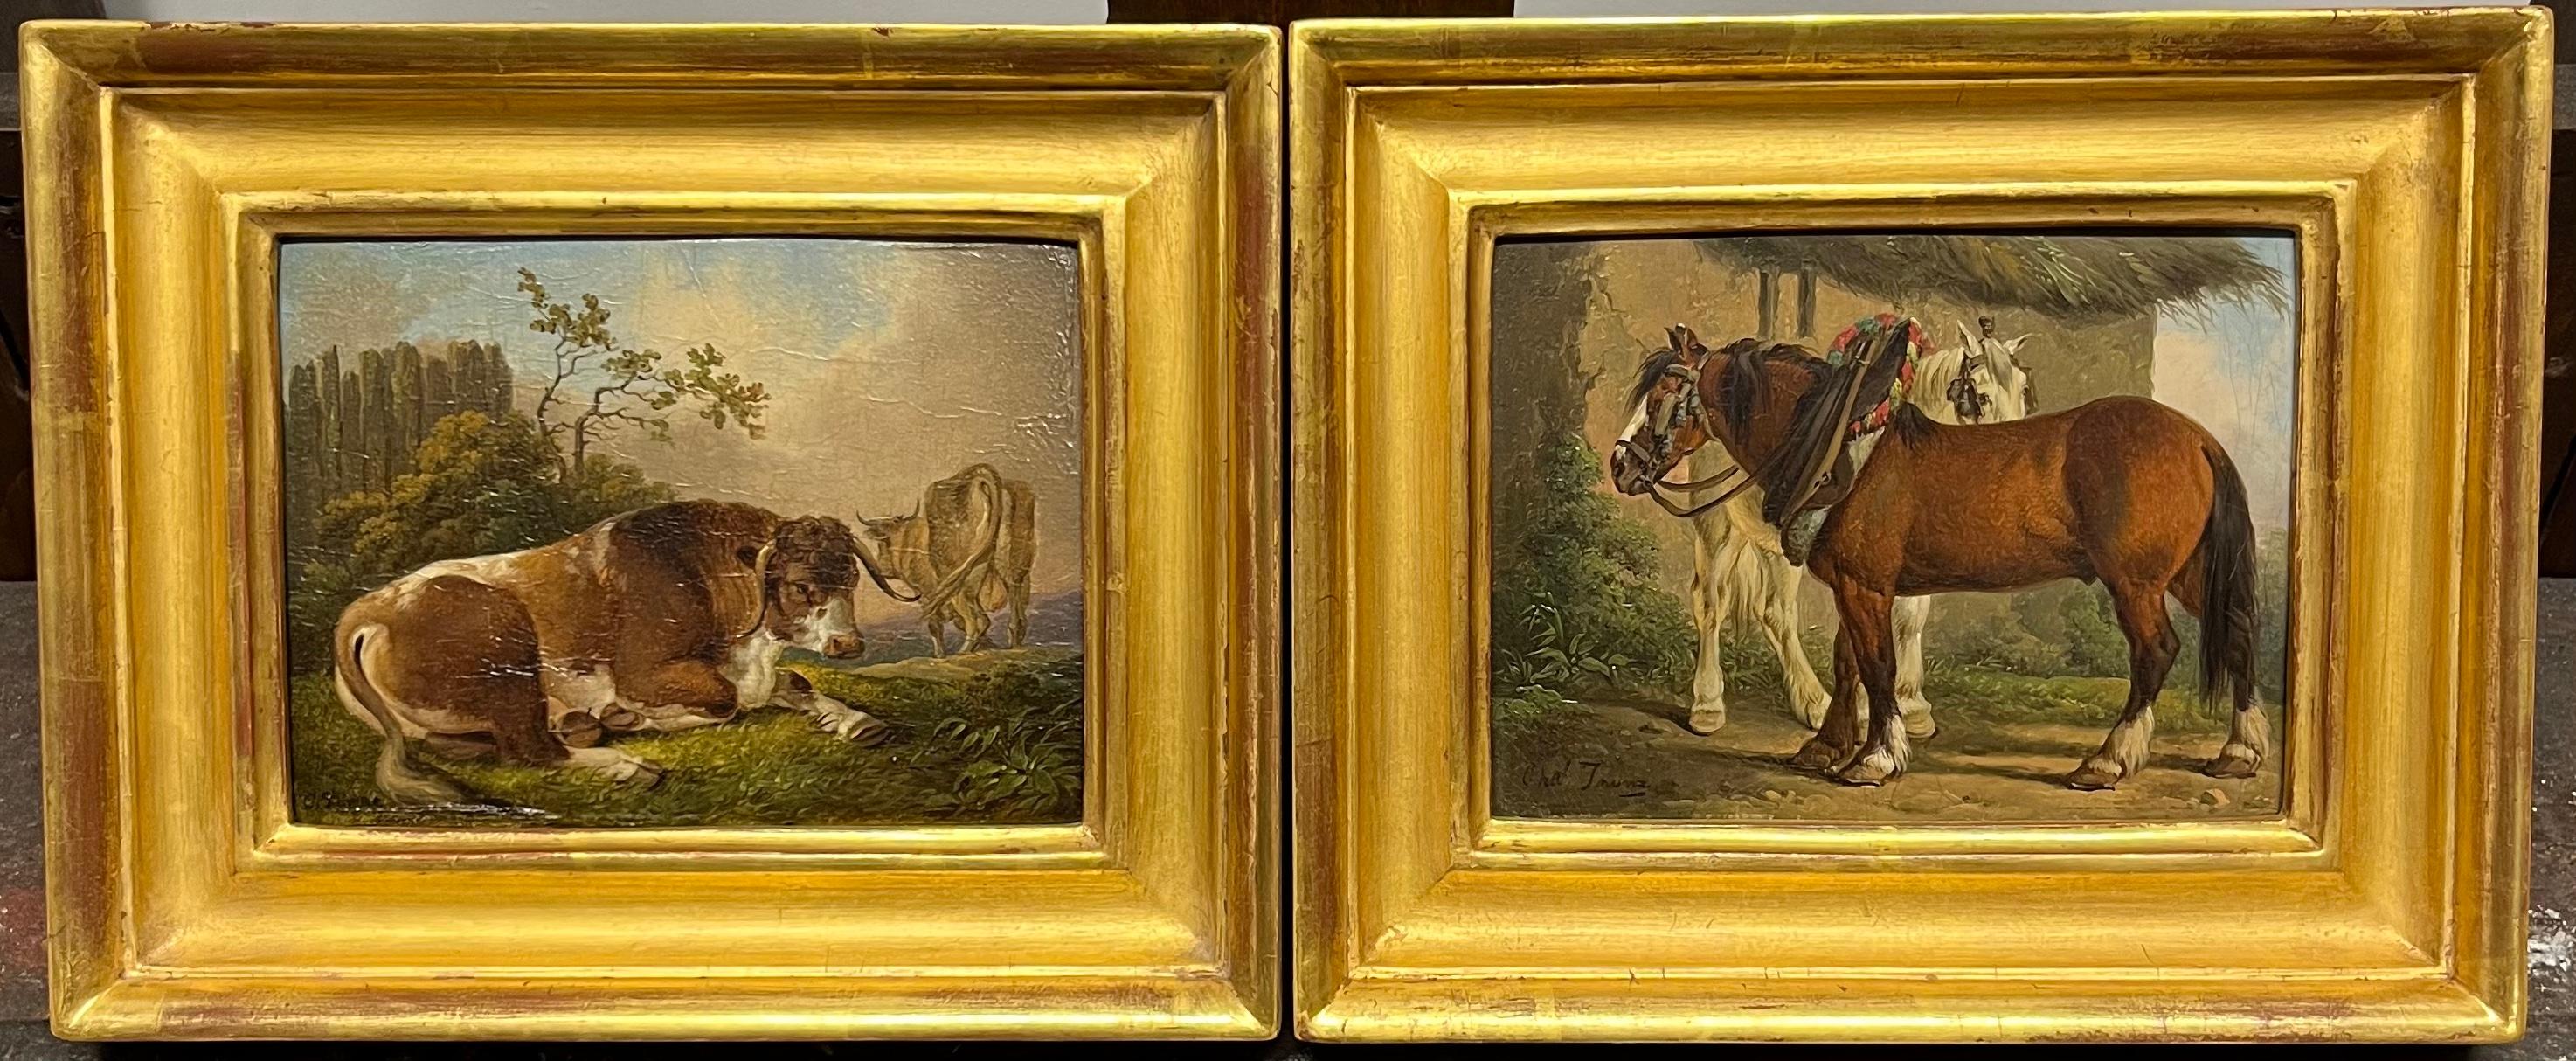 'Cart horses' & 'Cattle in a landscape'